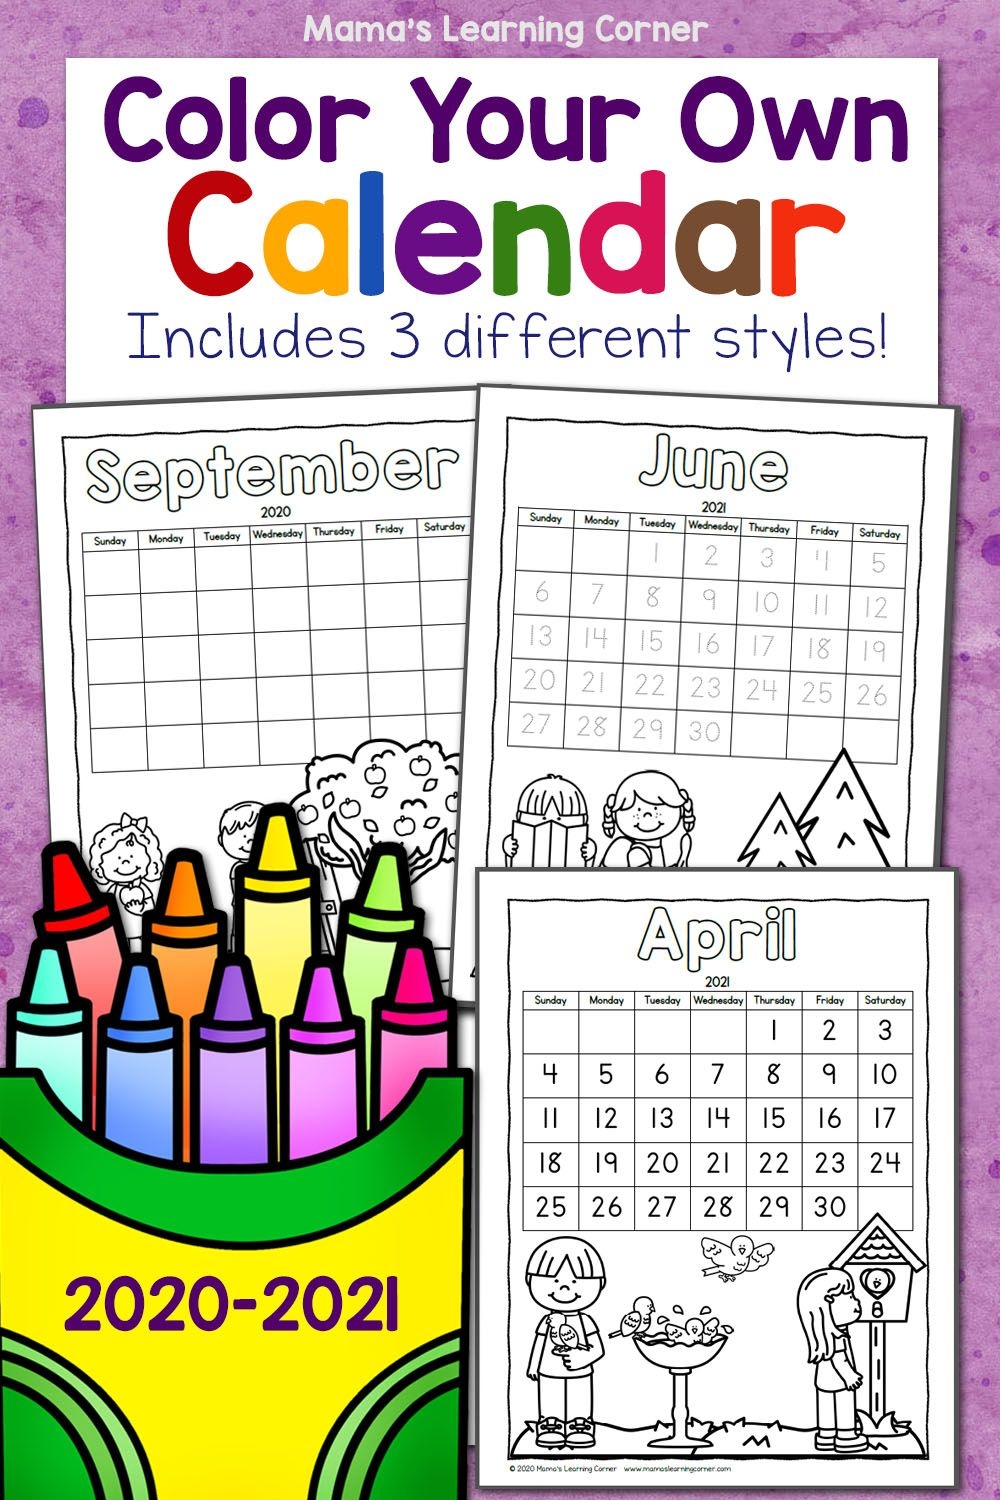 Color Your Own Calendar 2020-2021 - Mamas Learning Corner